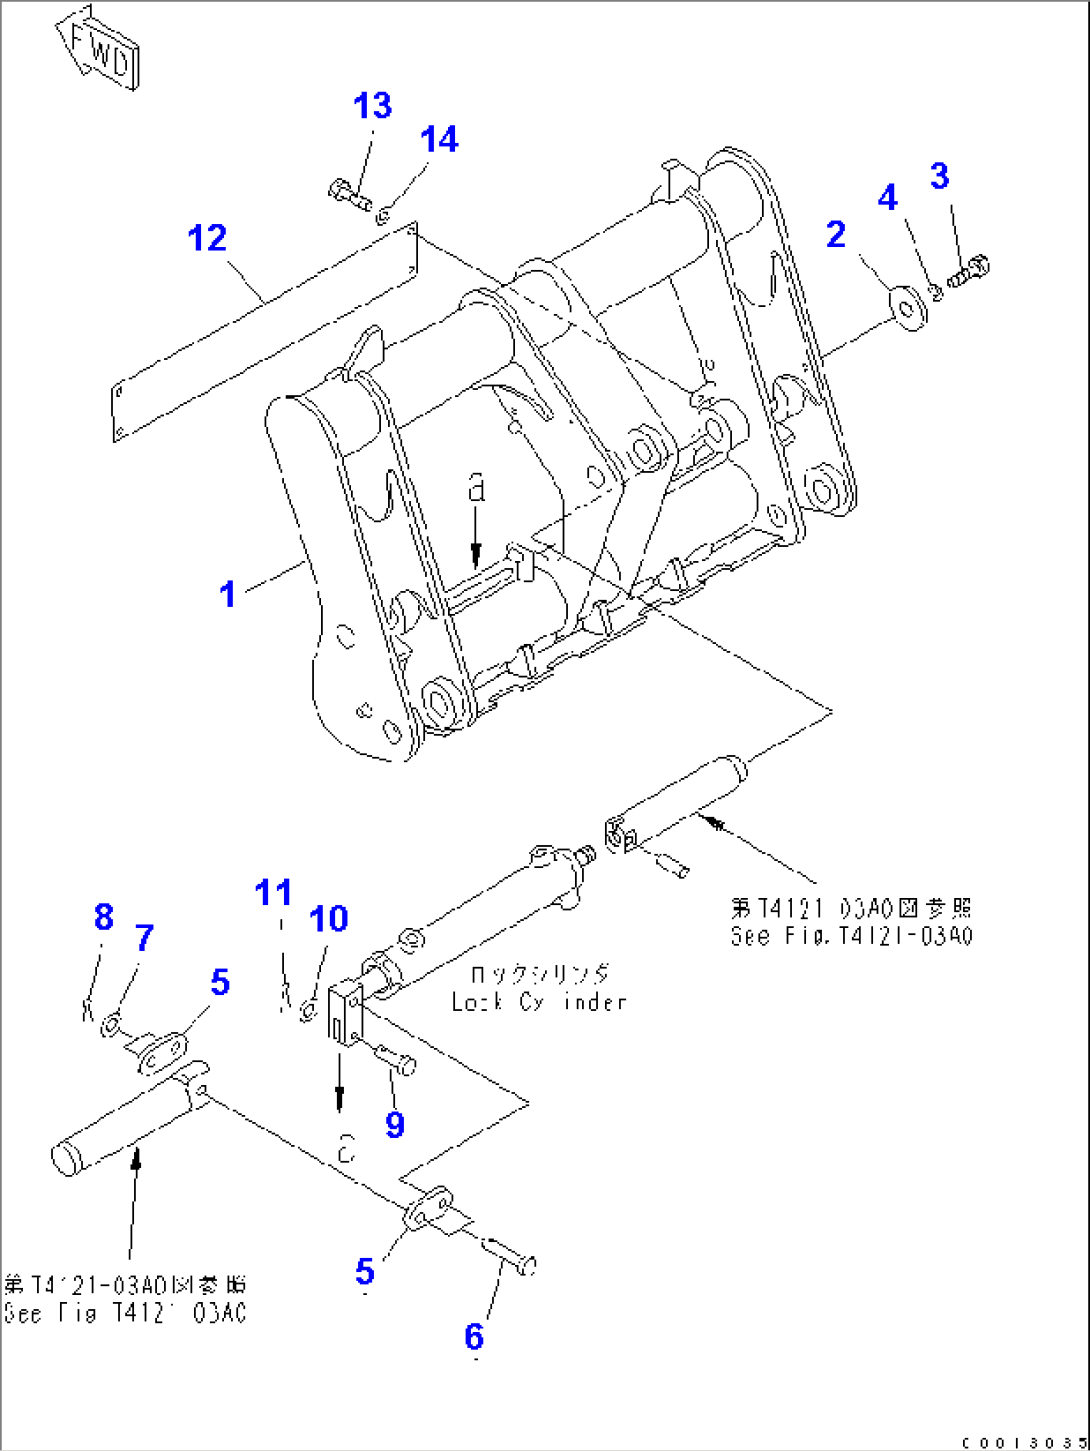 MULTI COUPLER (FOR P.A.P. OR S.P.A.P.)